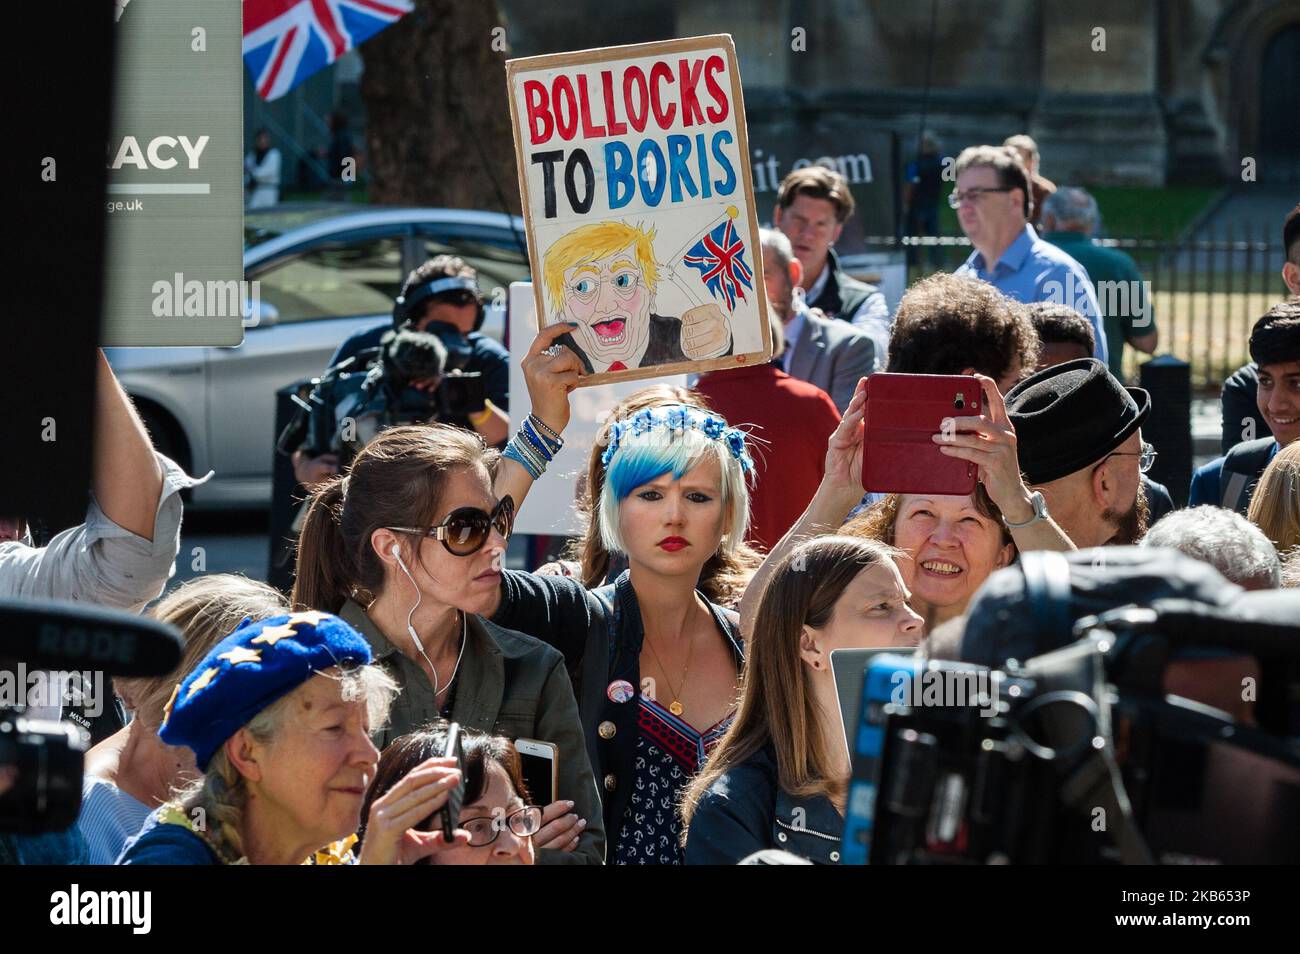 Anti-Brexit demonstrators protest outside the Supreme Court against Boris Johnson's suspension of parliament on 17 September, 2019 in London, England. Today, the Supreme Court judges begin a three-day hearing over the claim that Prime Minister Boris Johnson acted unlawfully in advising the Queen to prorogue parliament for five weeks in order to prevent MPs from debating the Brexit crisis. (Photo by WIktor Szymanowicz/NurPhoto) Stock Photo